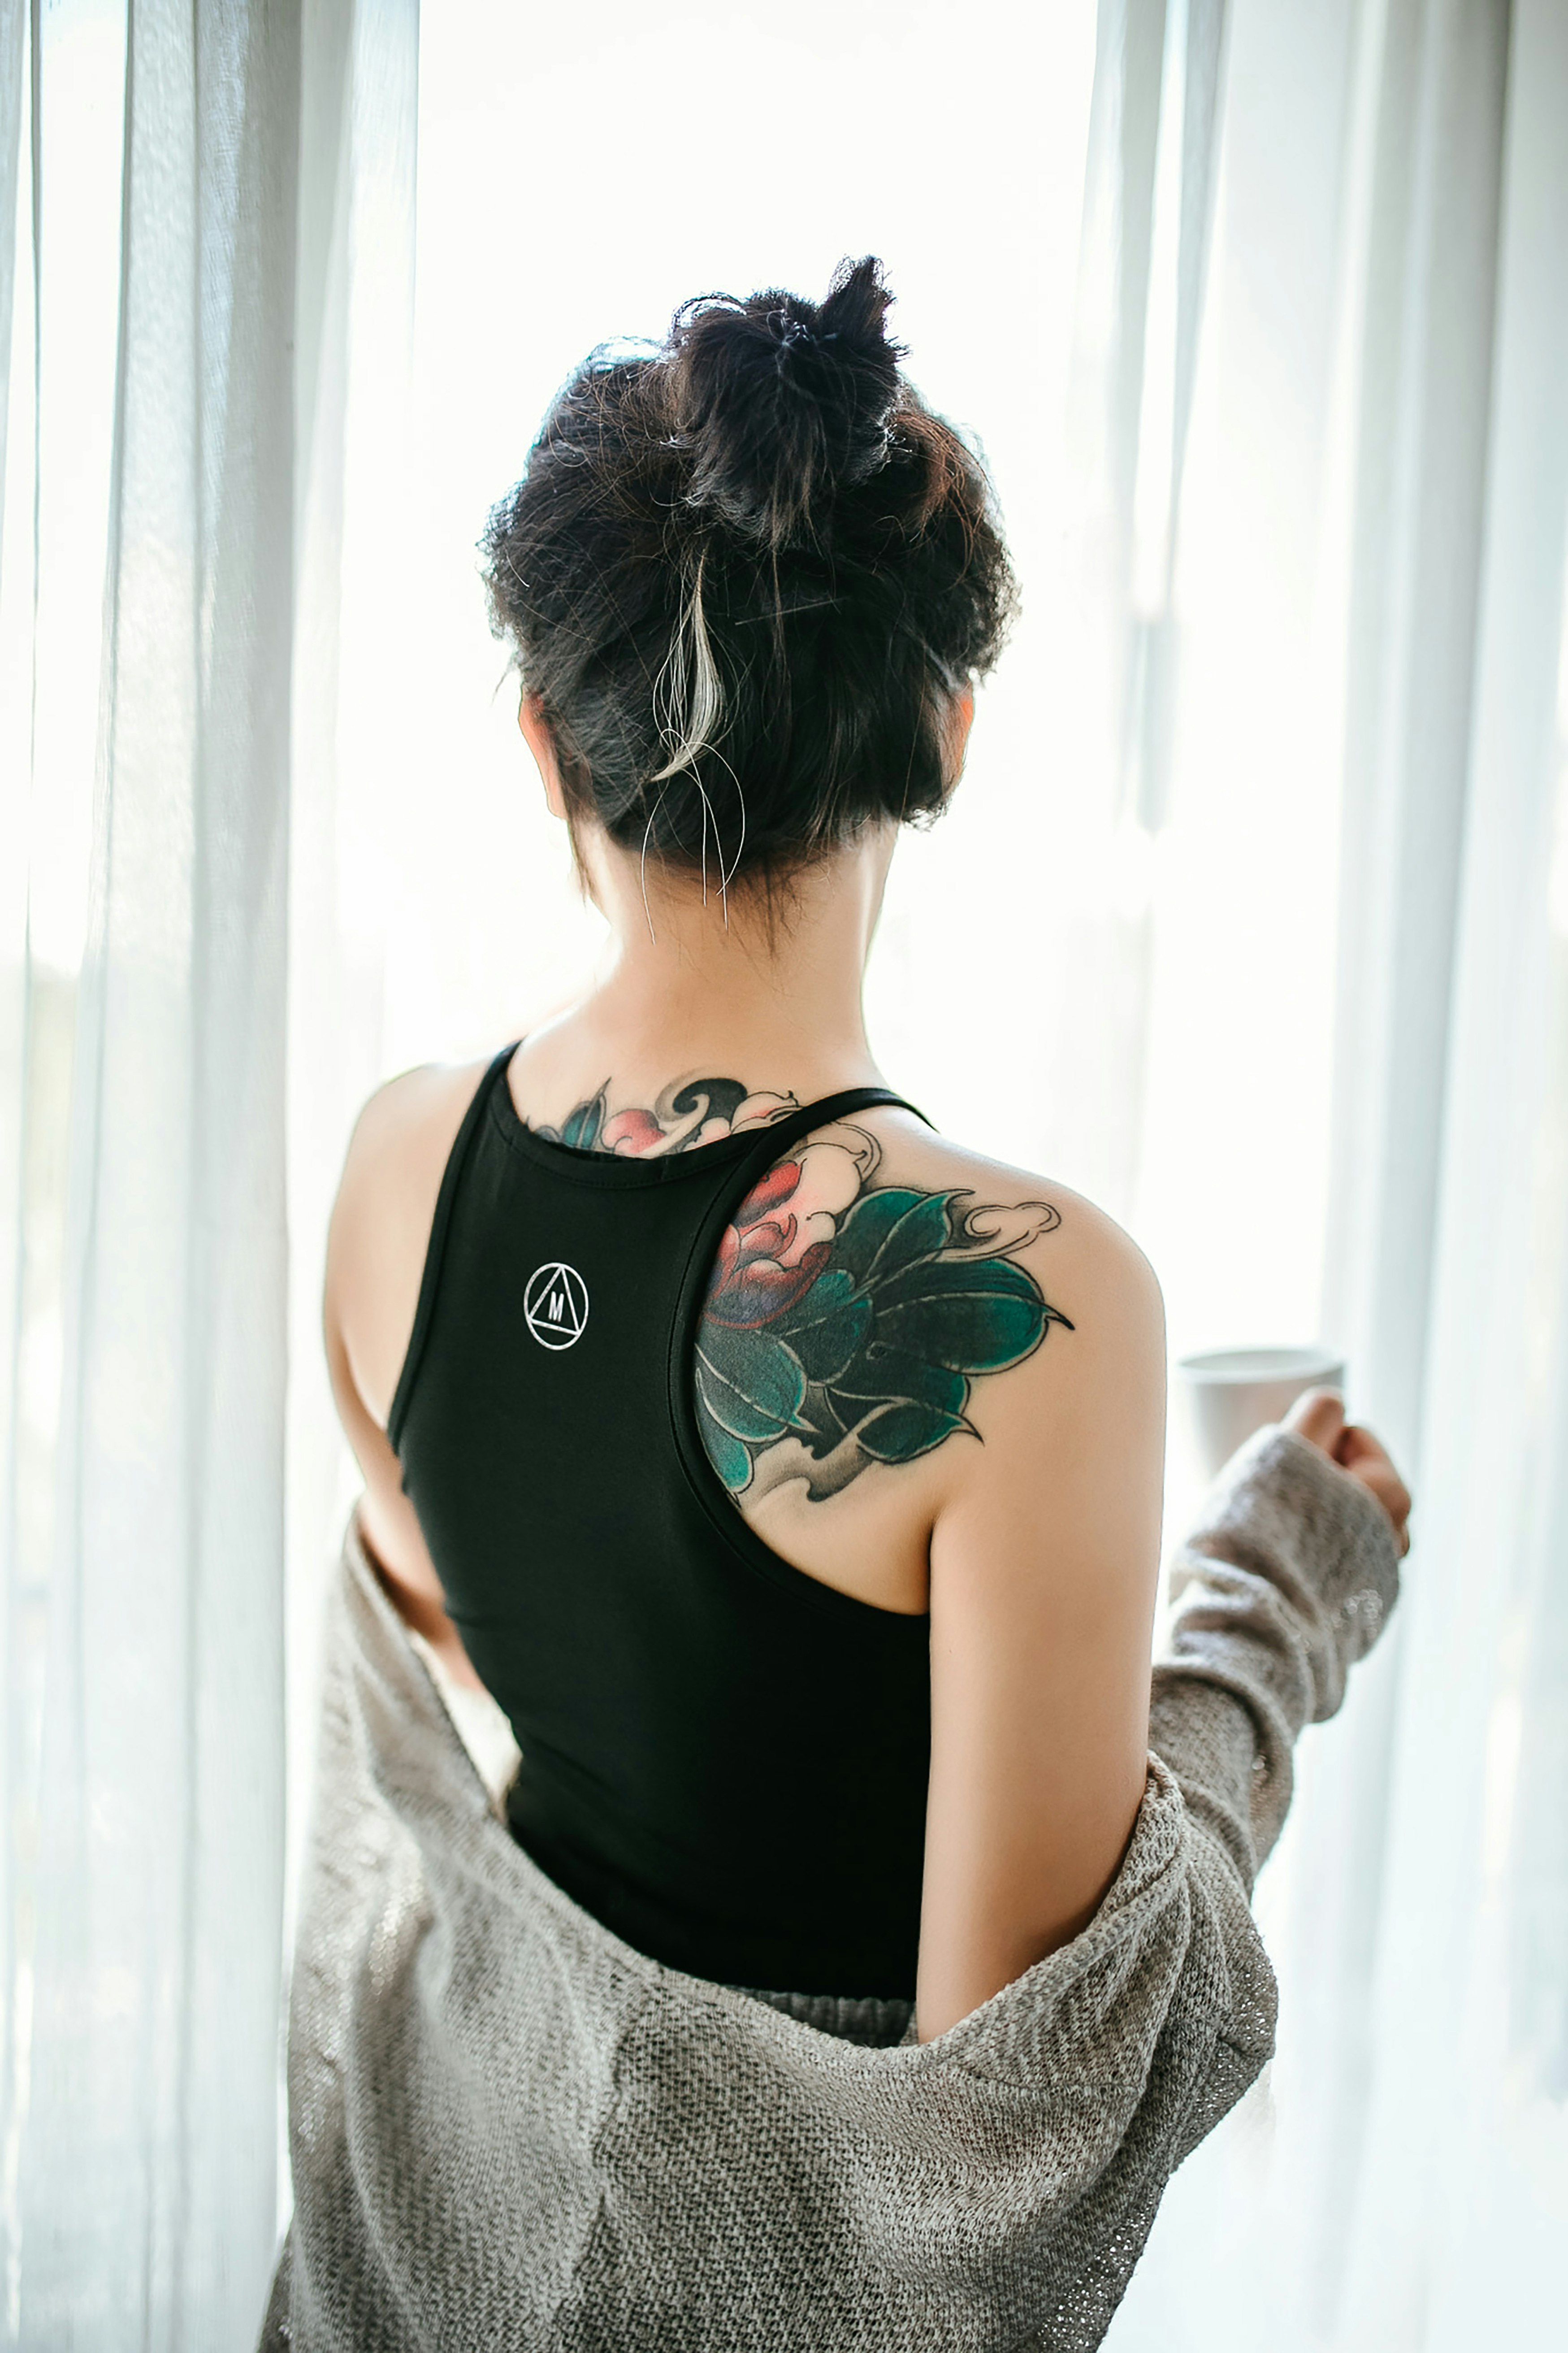 Best of Pictures of girls with tattoos